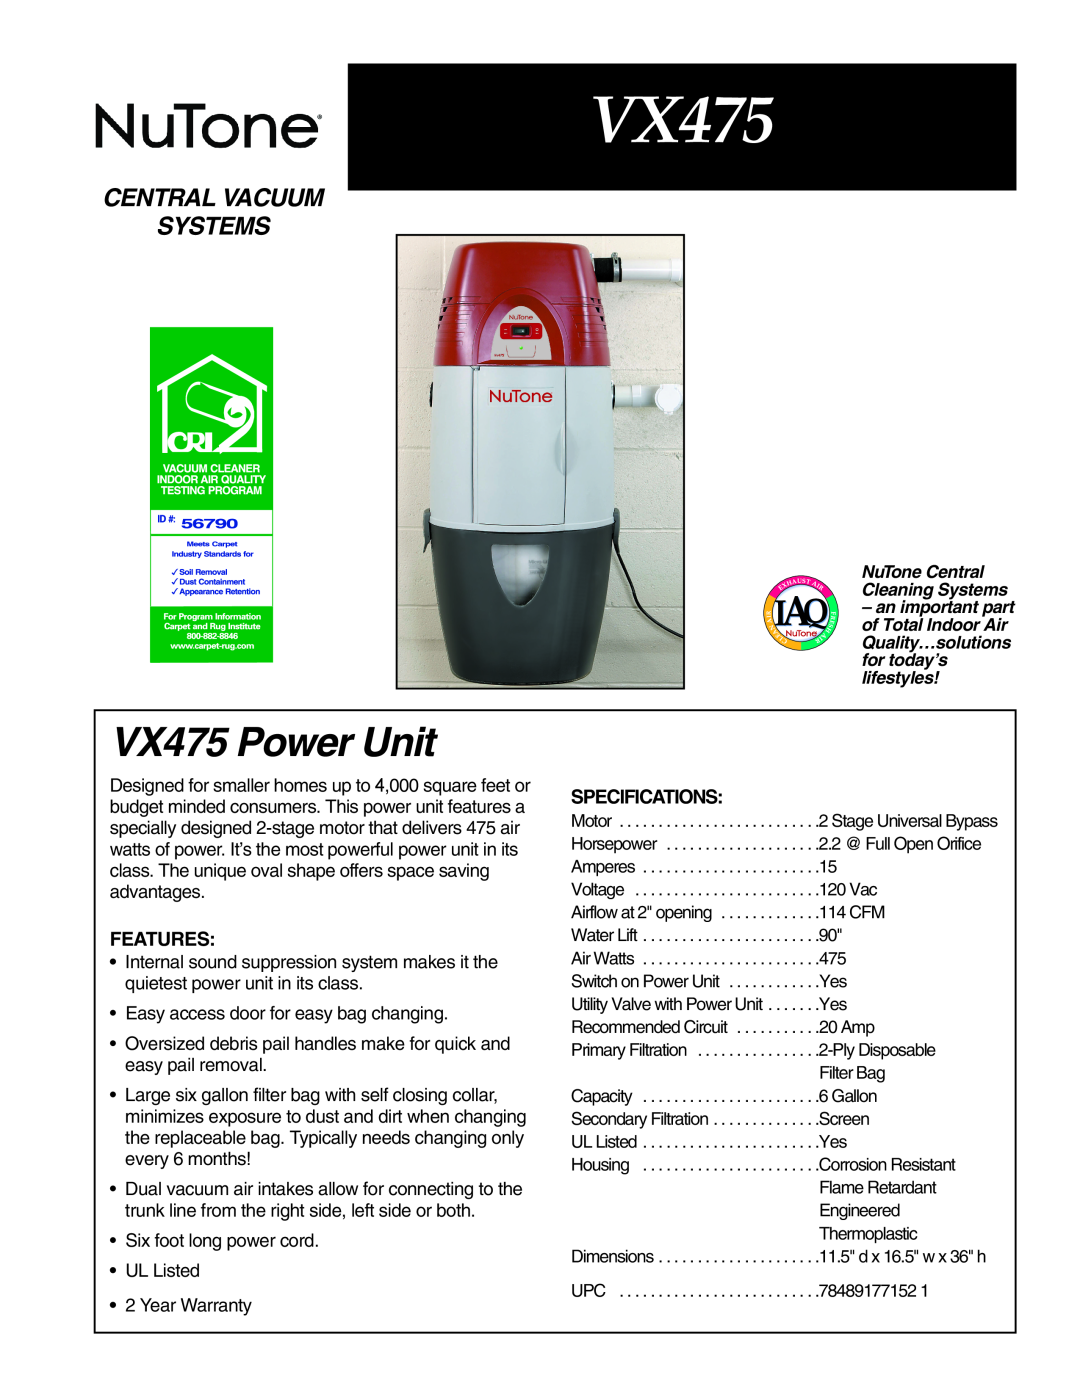 NuTone vx475 specifications VX475 Power Unit, Central Vacuum Systems, Specifications, Features 